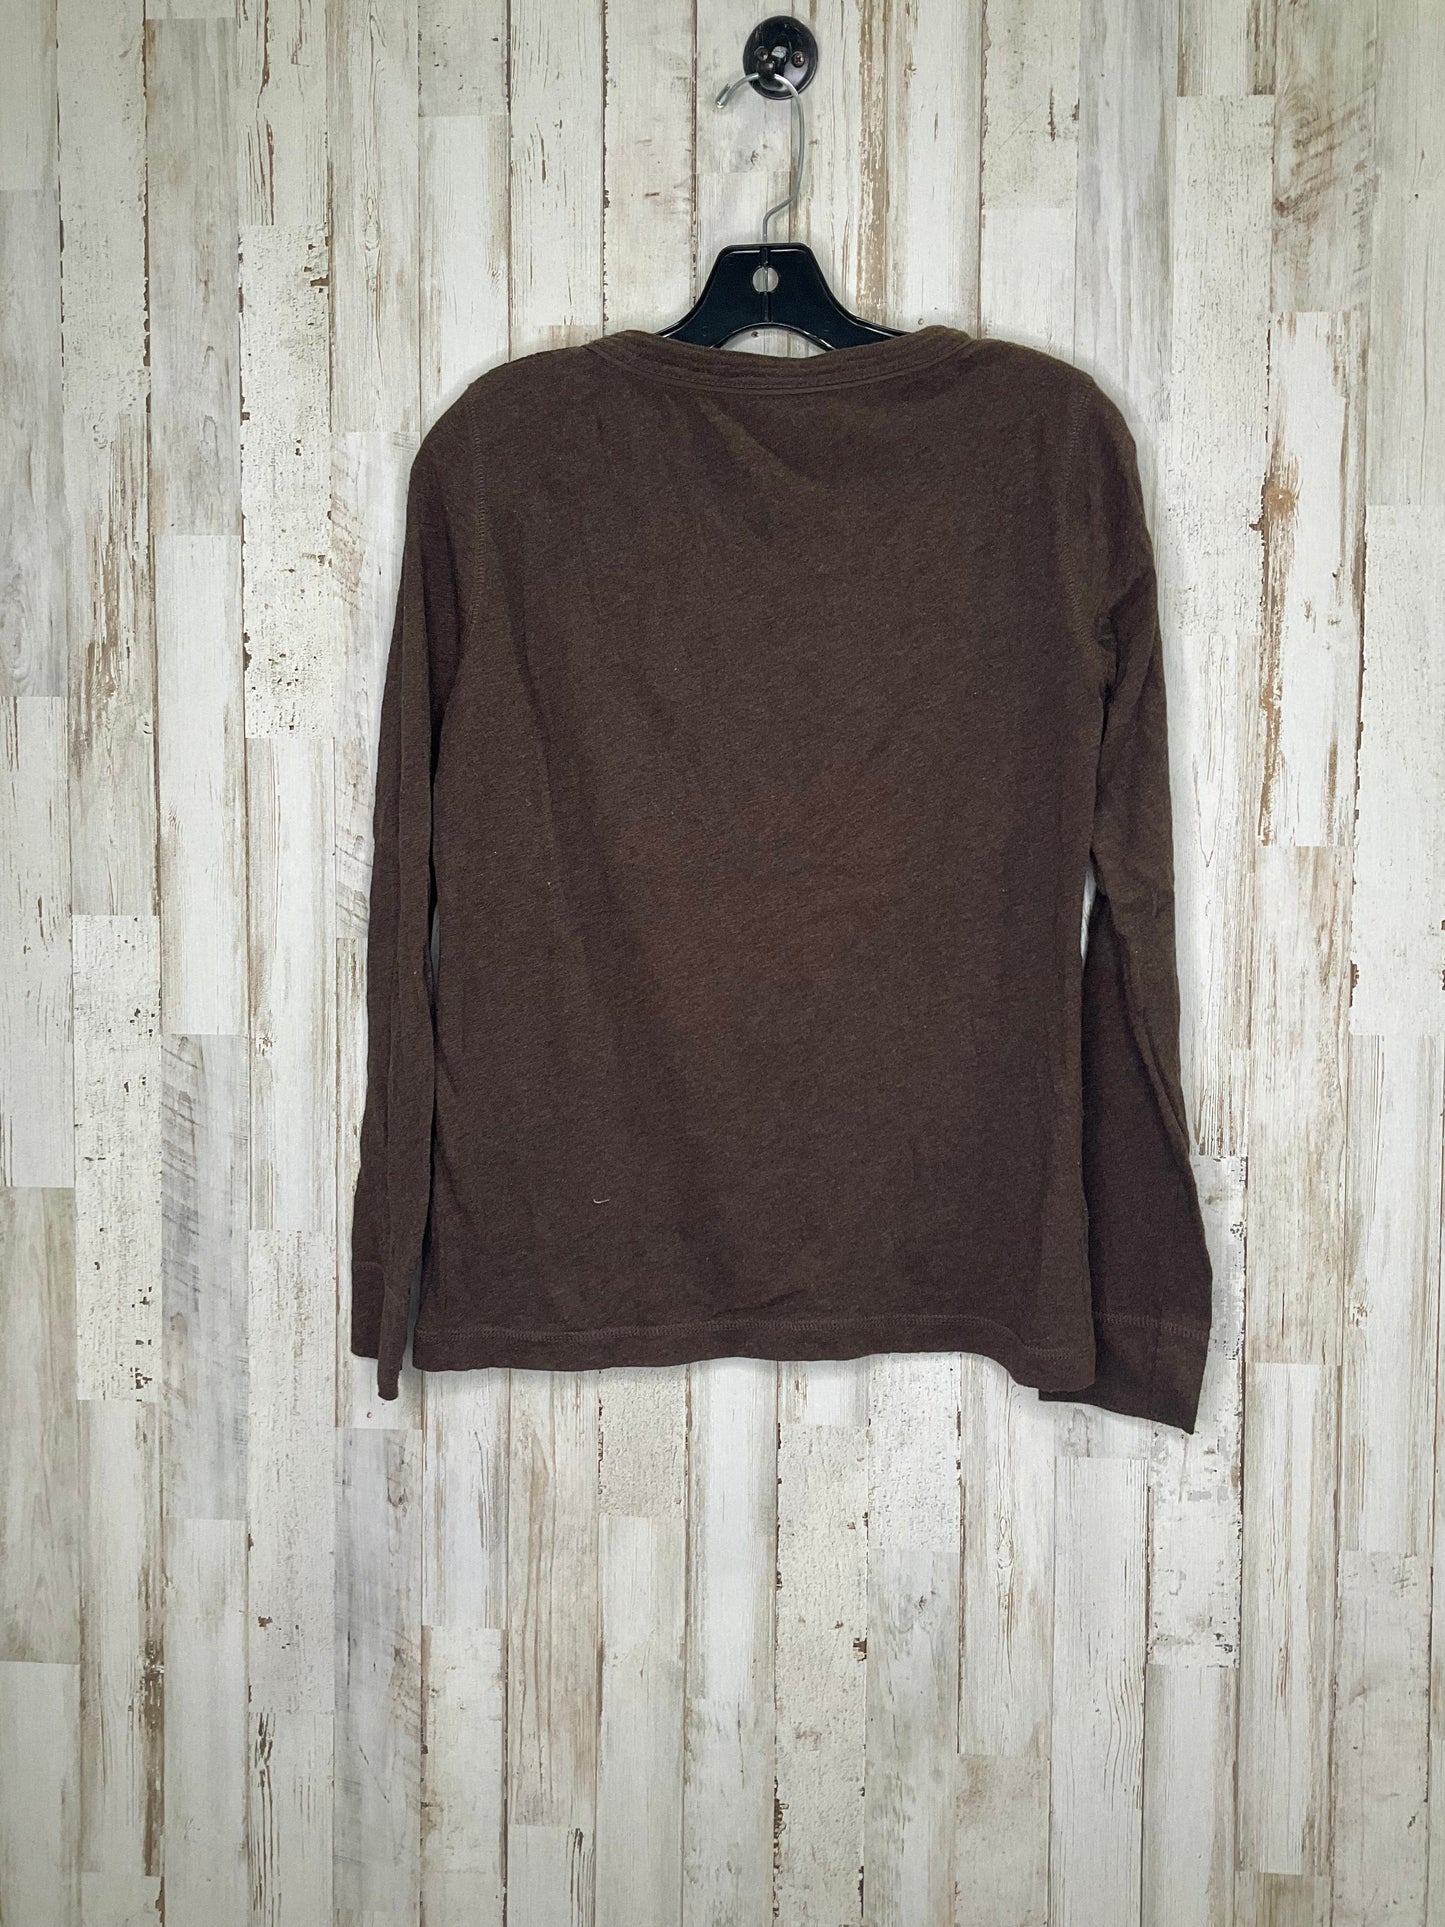 Top Long Sleeve By Eddie Bauer  Size: S